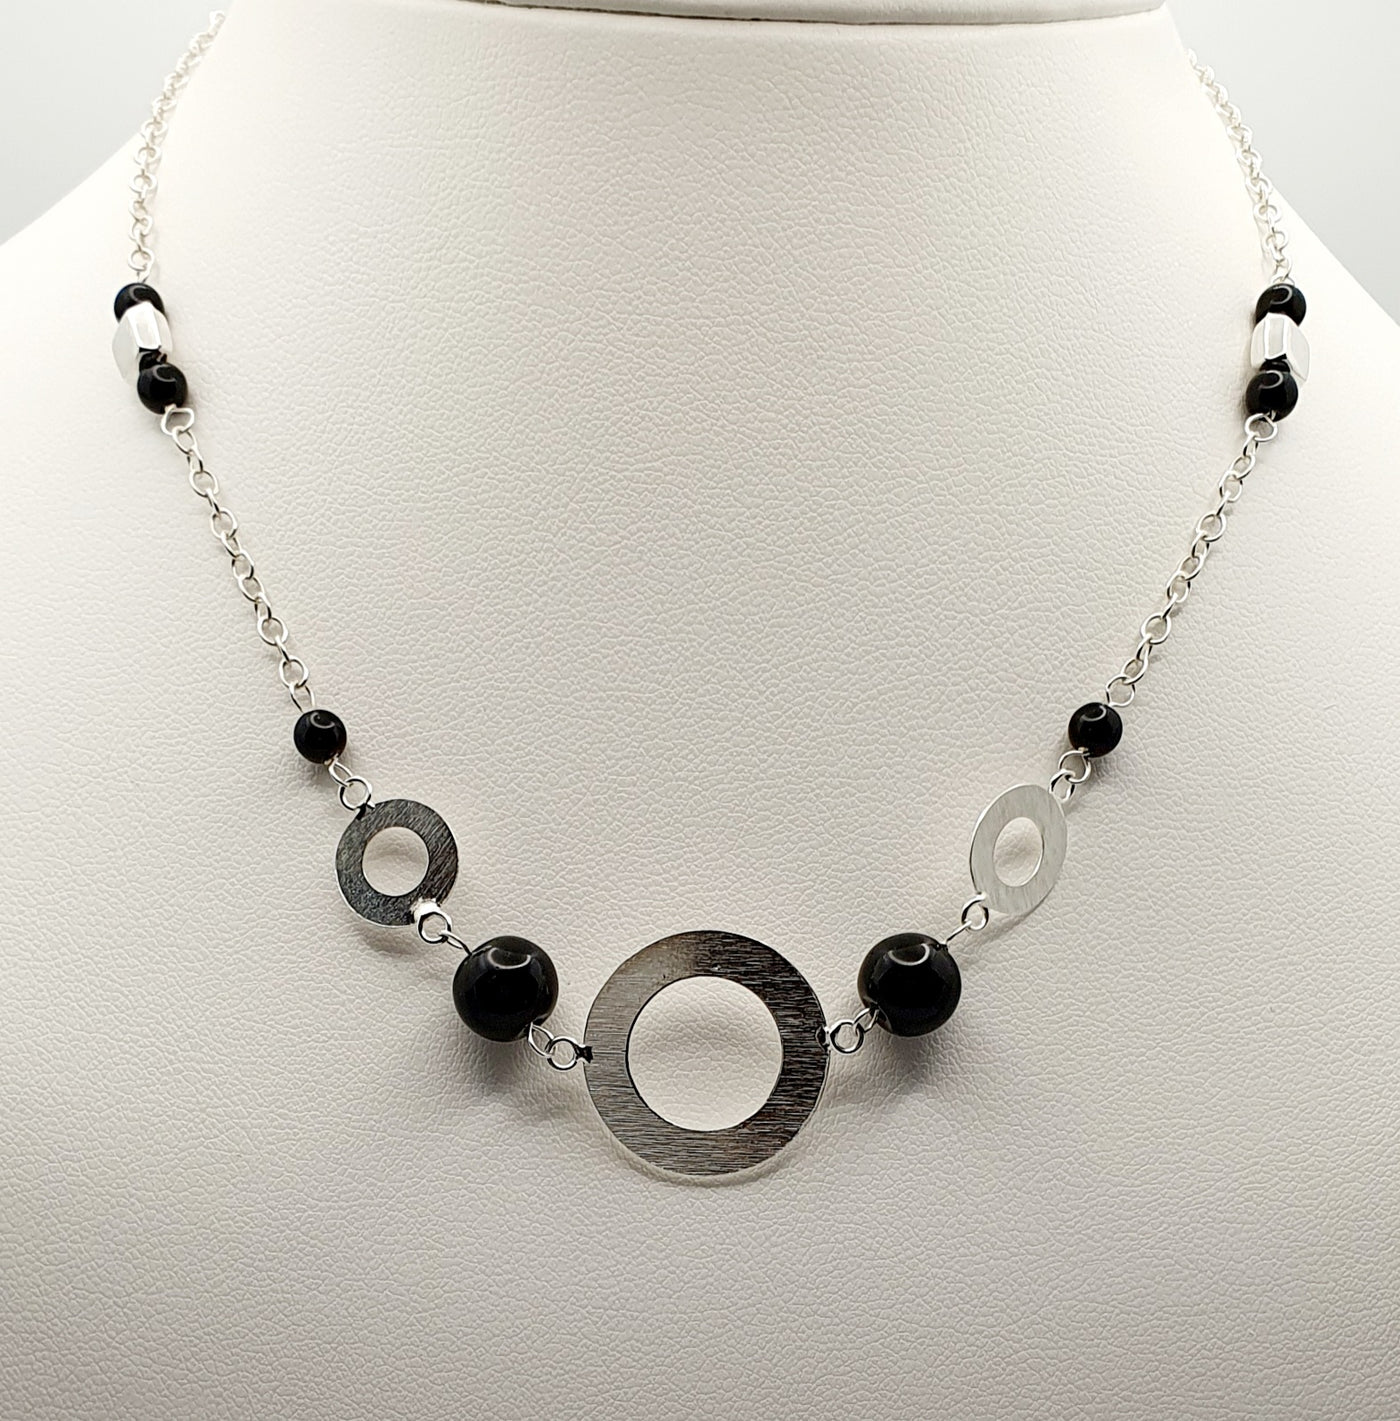 Sterling Silver Onyx Bead Necklace with Silver Circle and Square Matte Accents 87.5cm